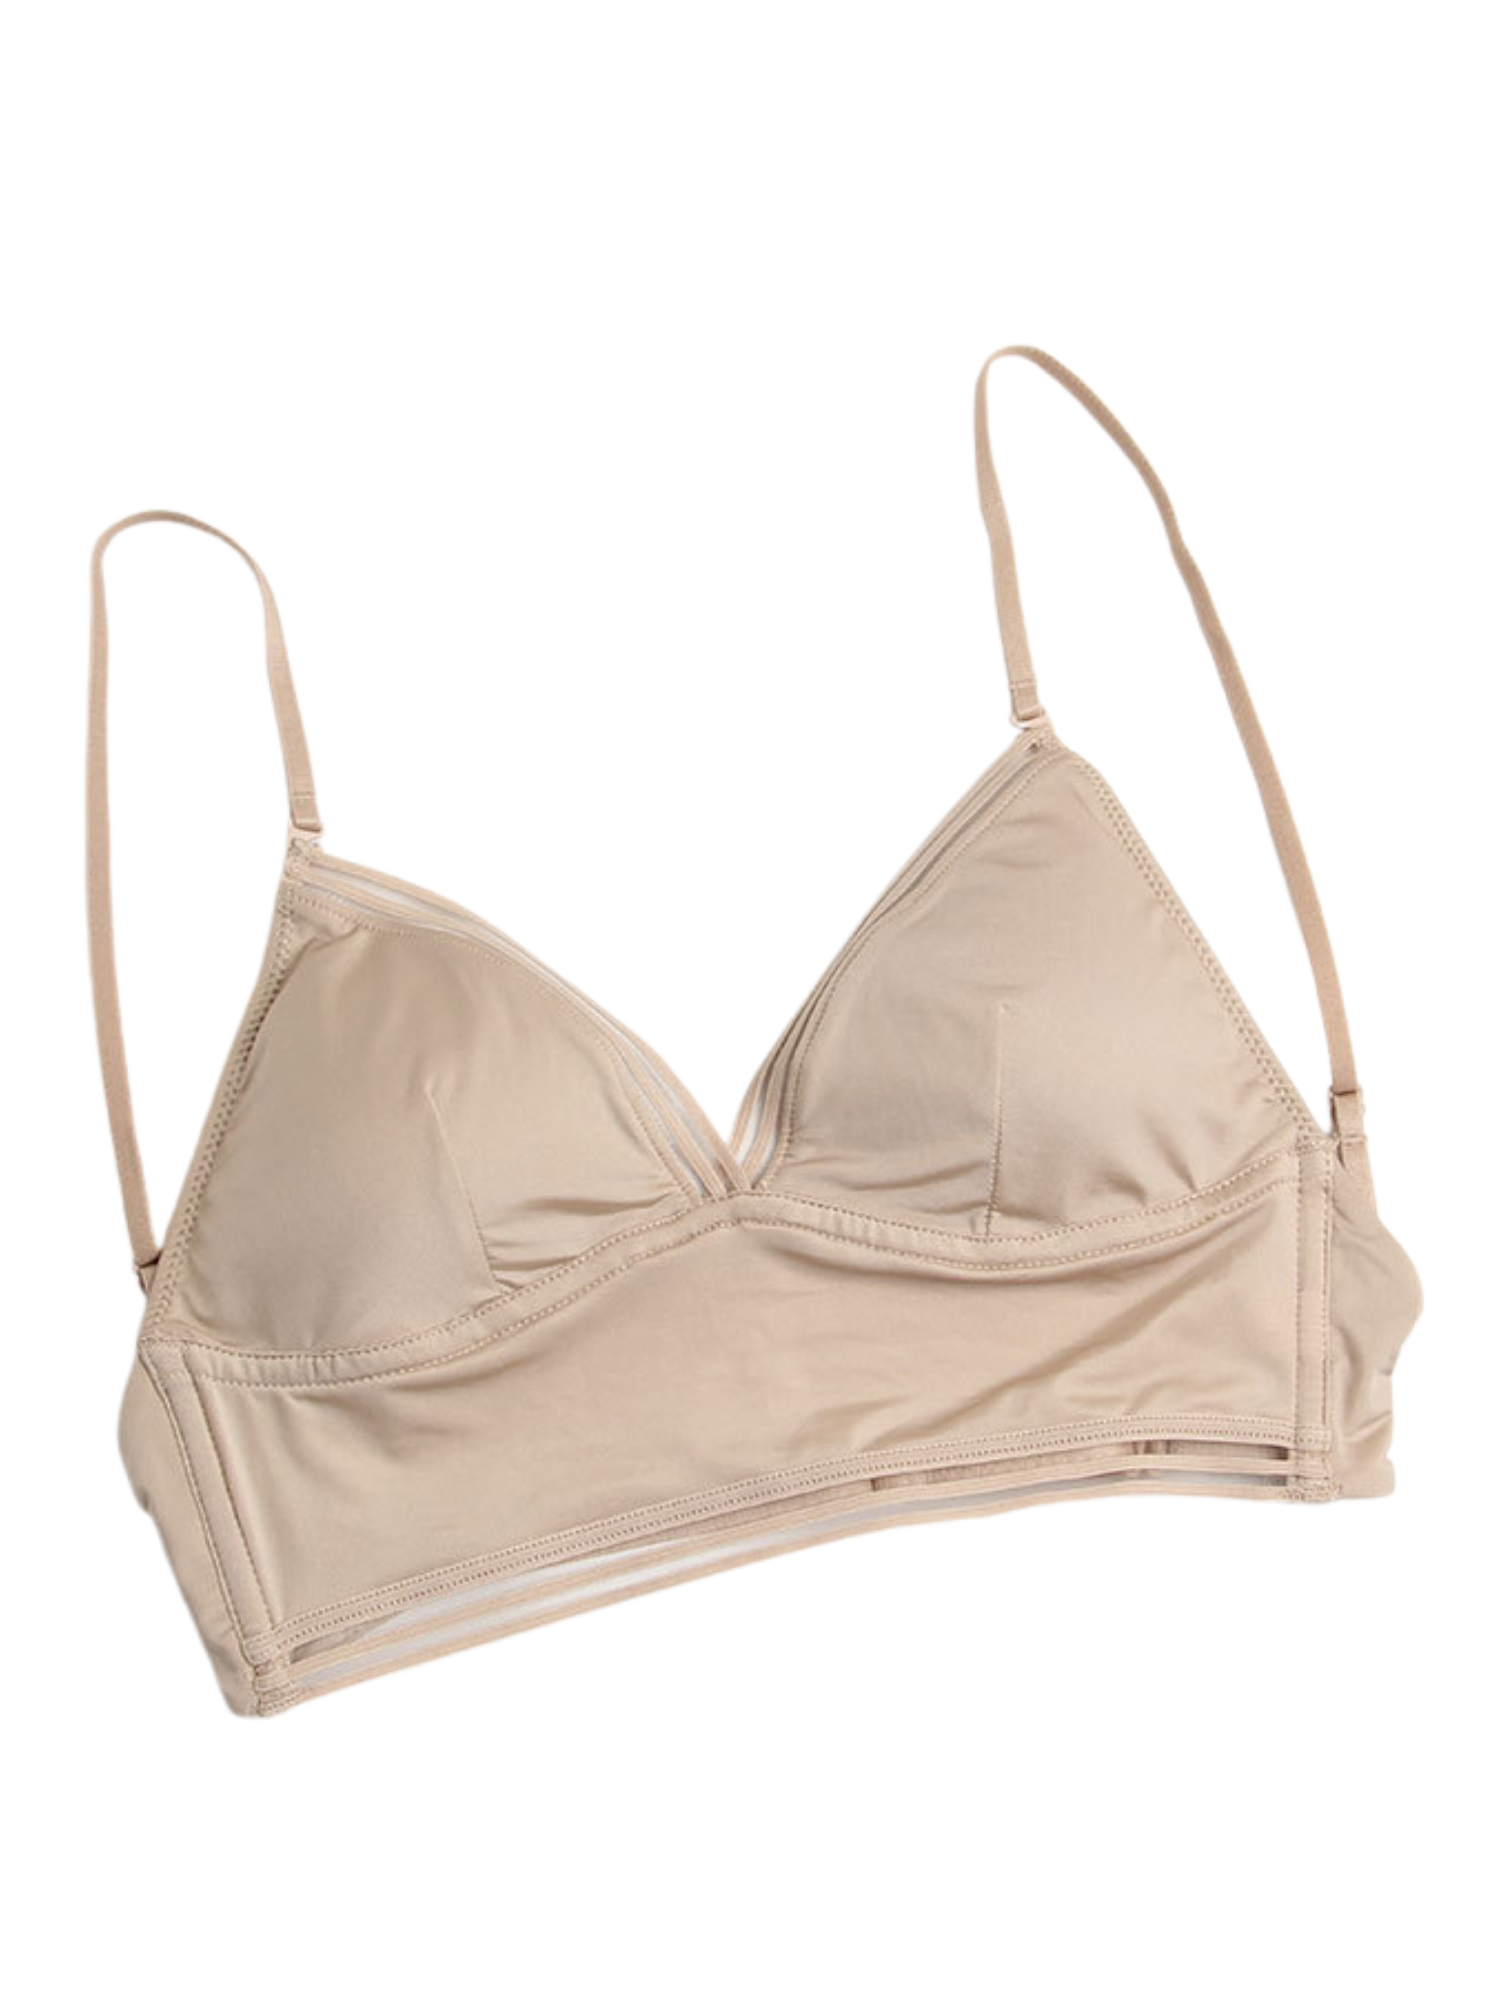 Aerie Wireless Bra Tan Size M - $19 (52% Off Retail) New With Tags - From  Kyra